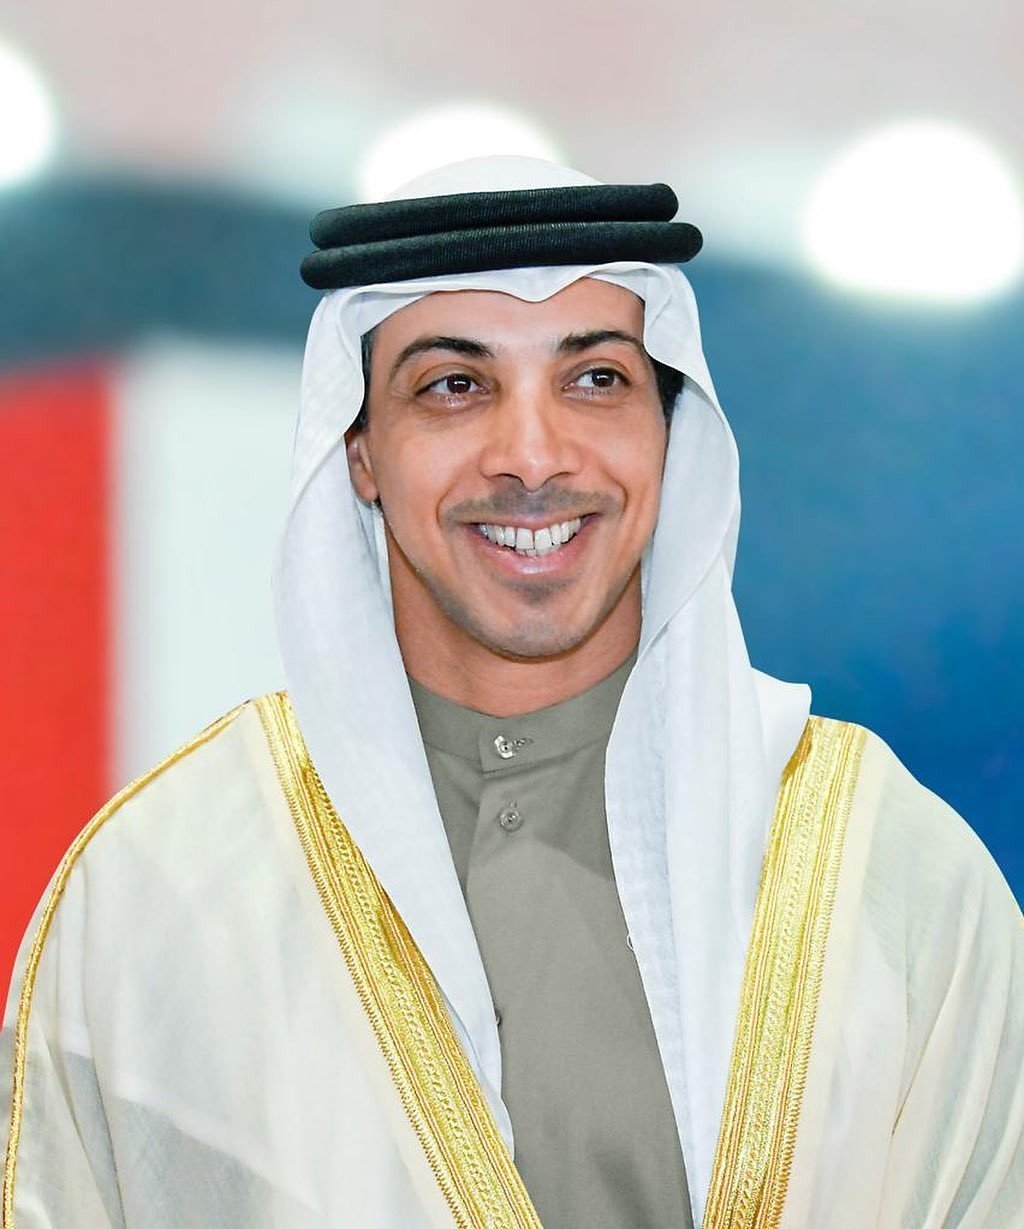 Sheikh Mansour bin Zayed Al Nahyan is well known as the owner of Manchester City Football Club – but what else do you know about the UAE royal? Photo: Instagram